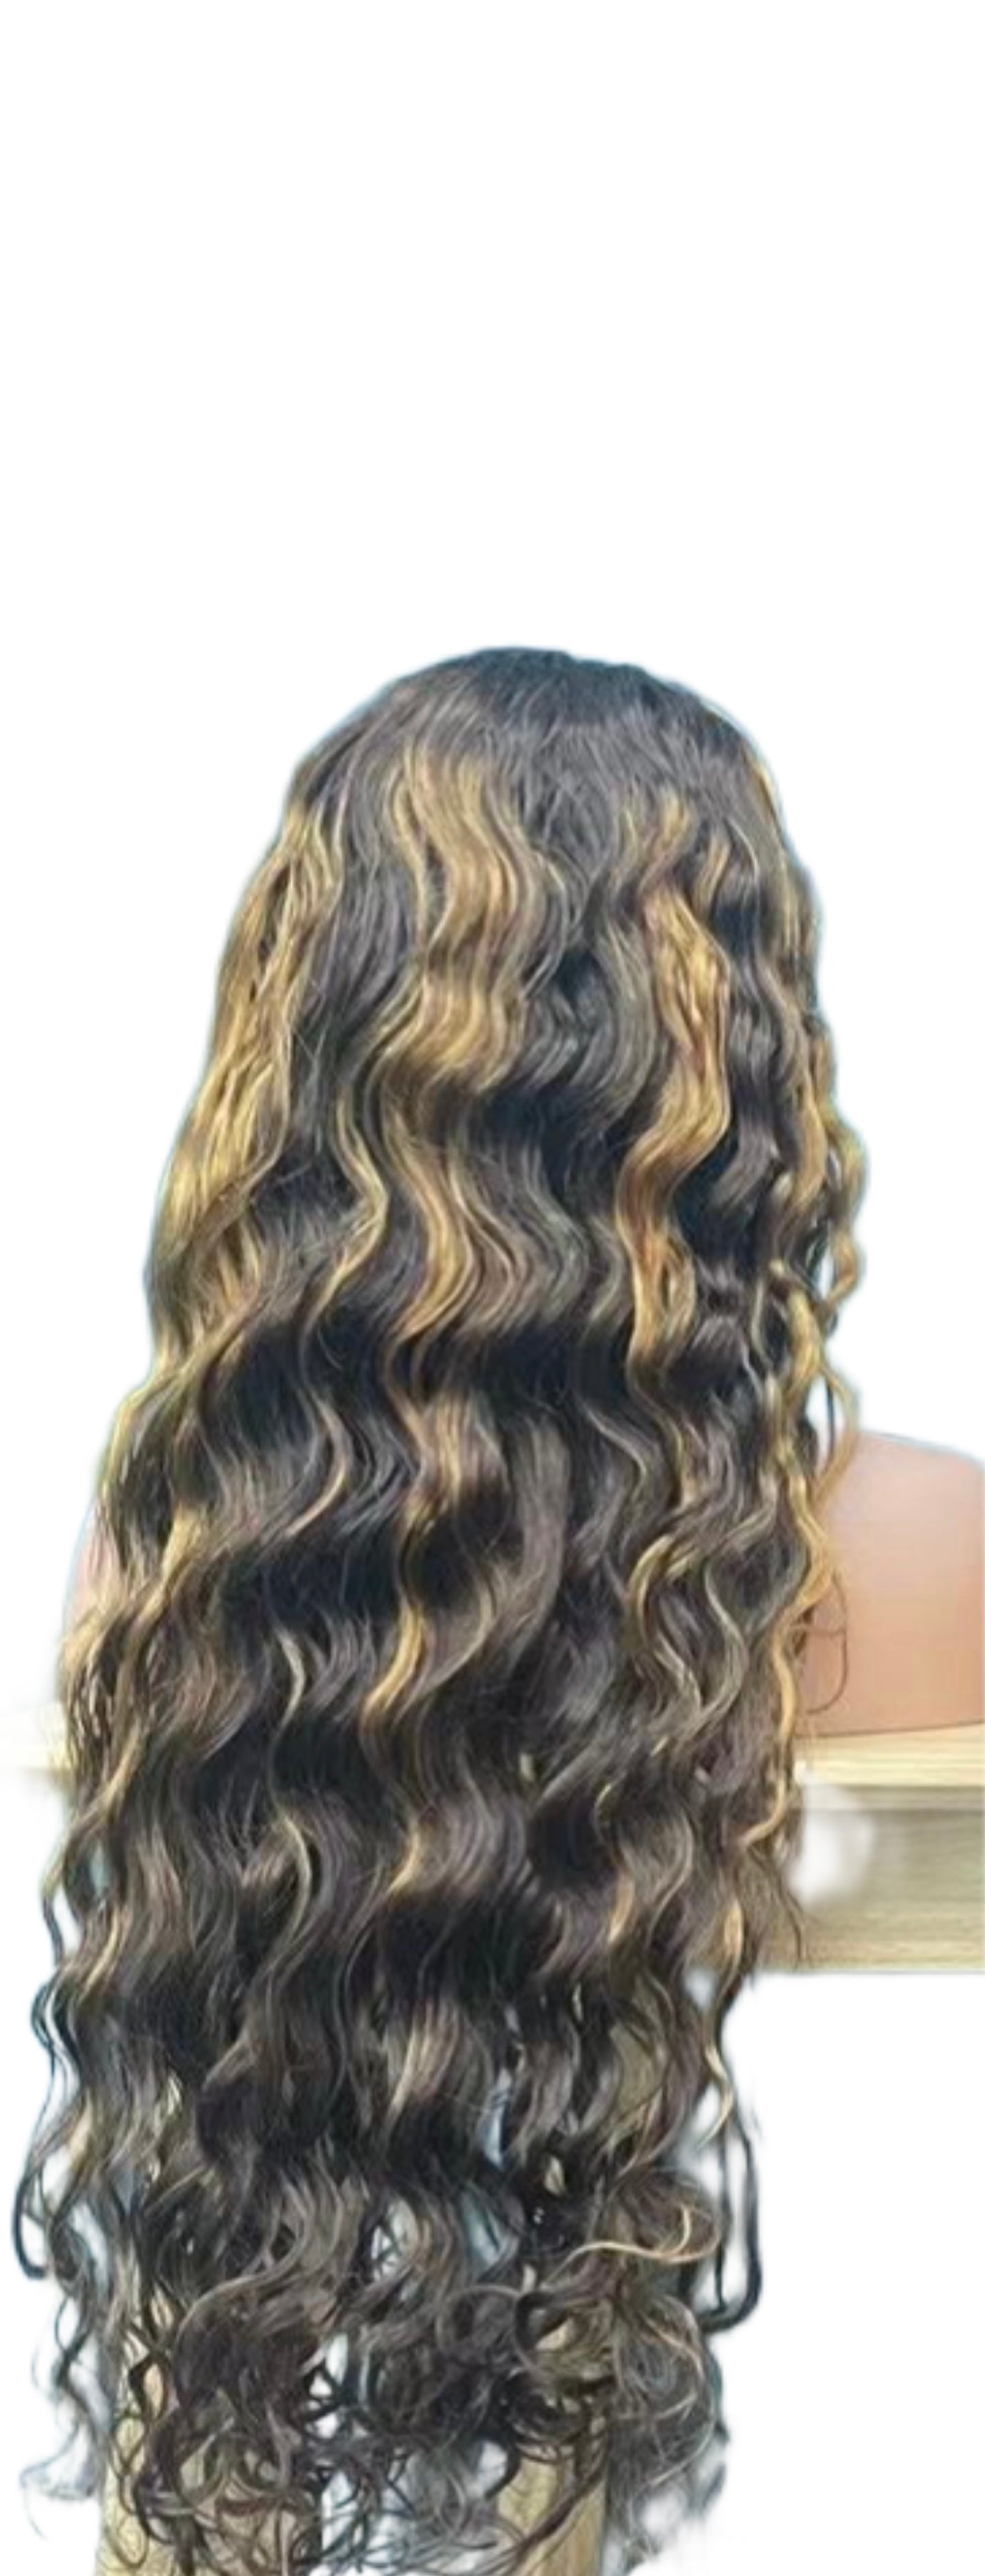 Natural Highlight Deep Curly Swiss Lace Front Wig